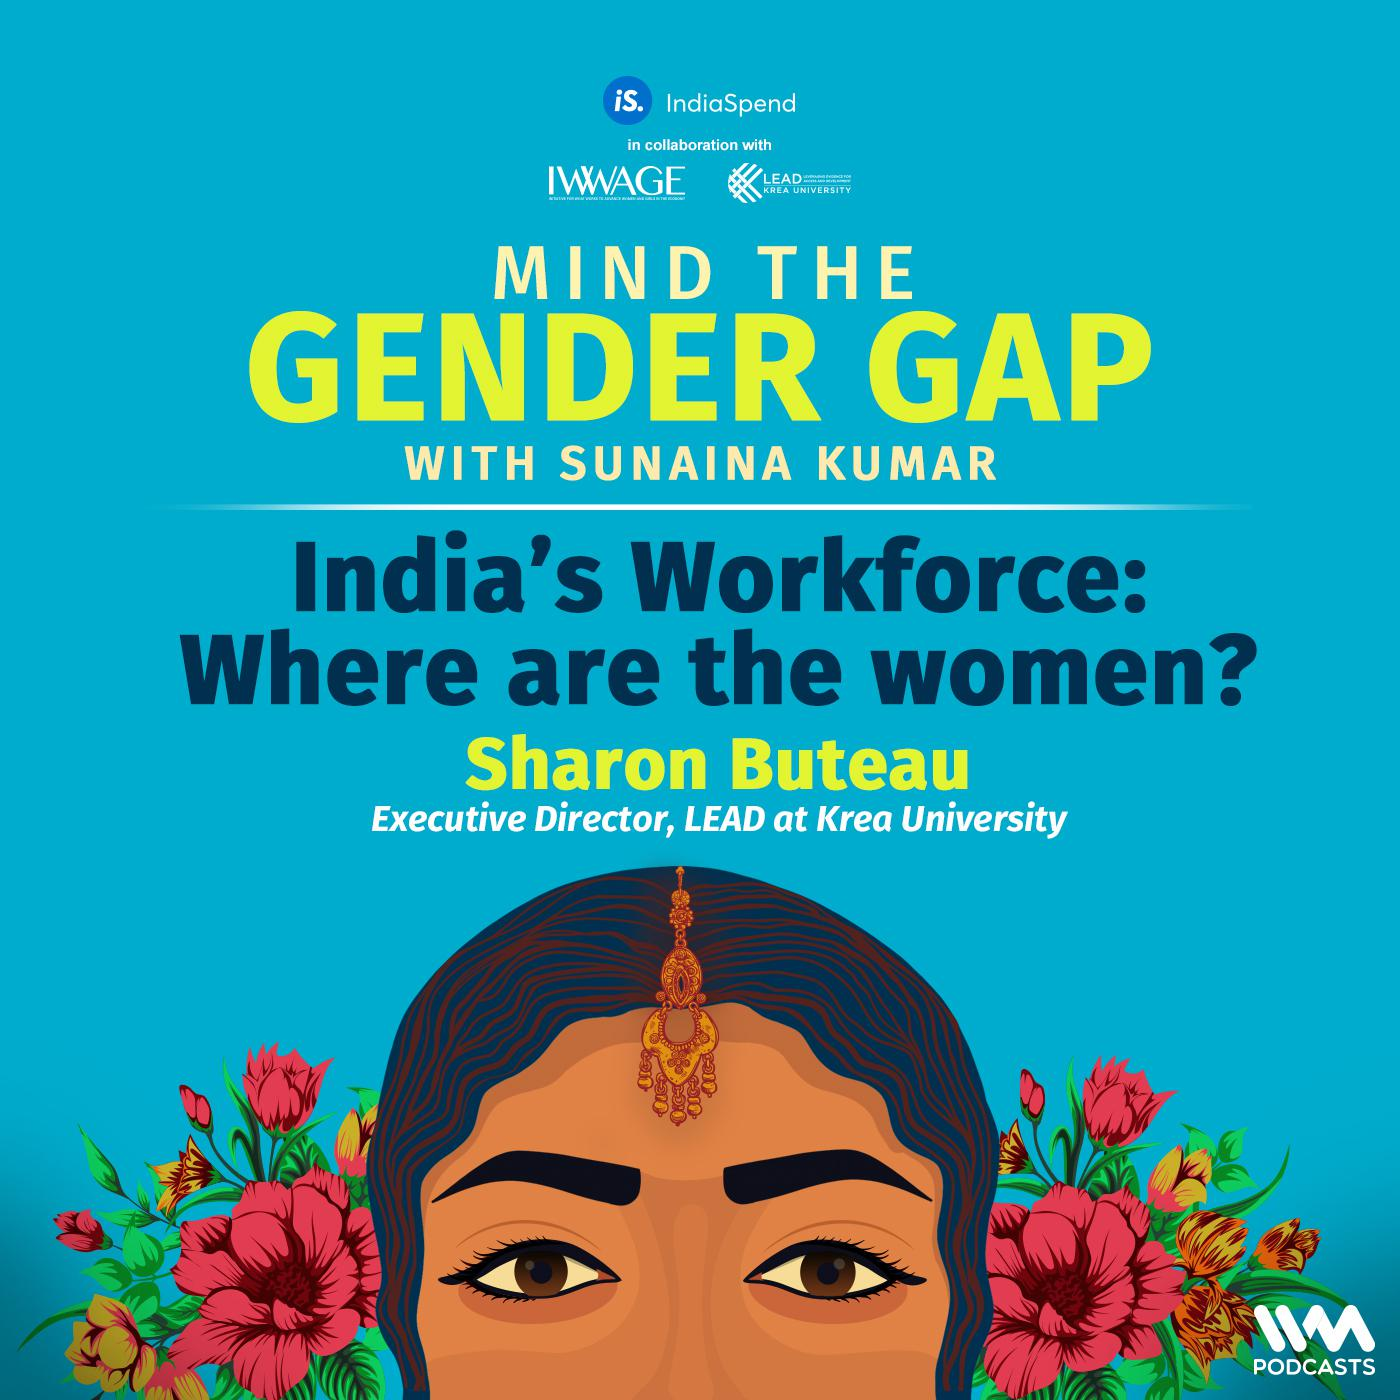 India’s Workforce: Where are the women?